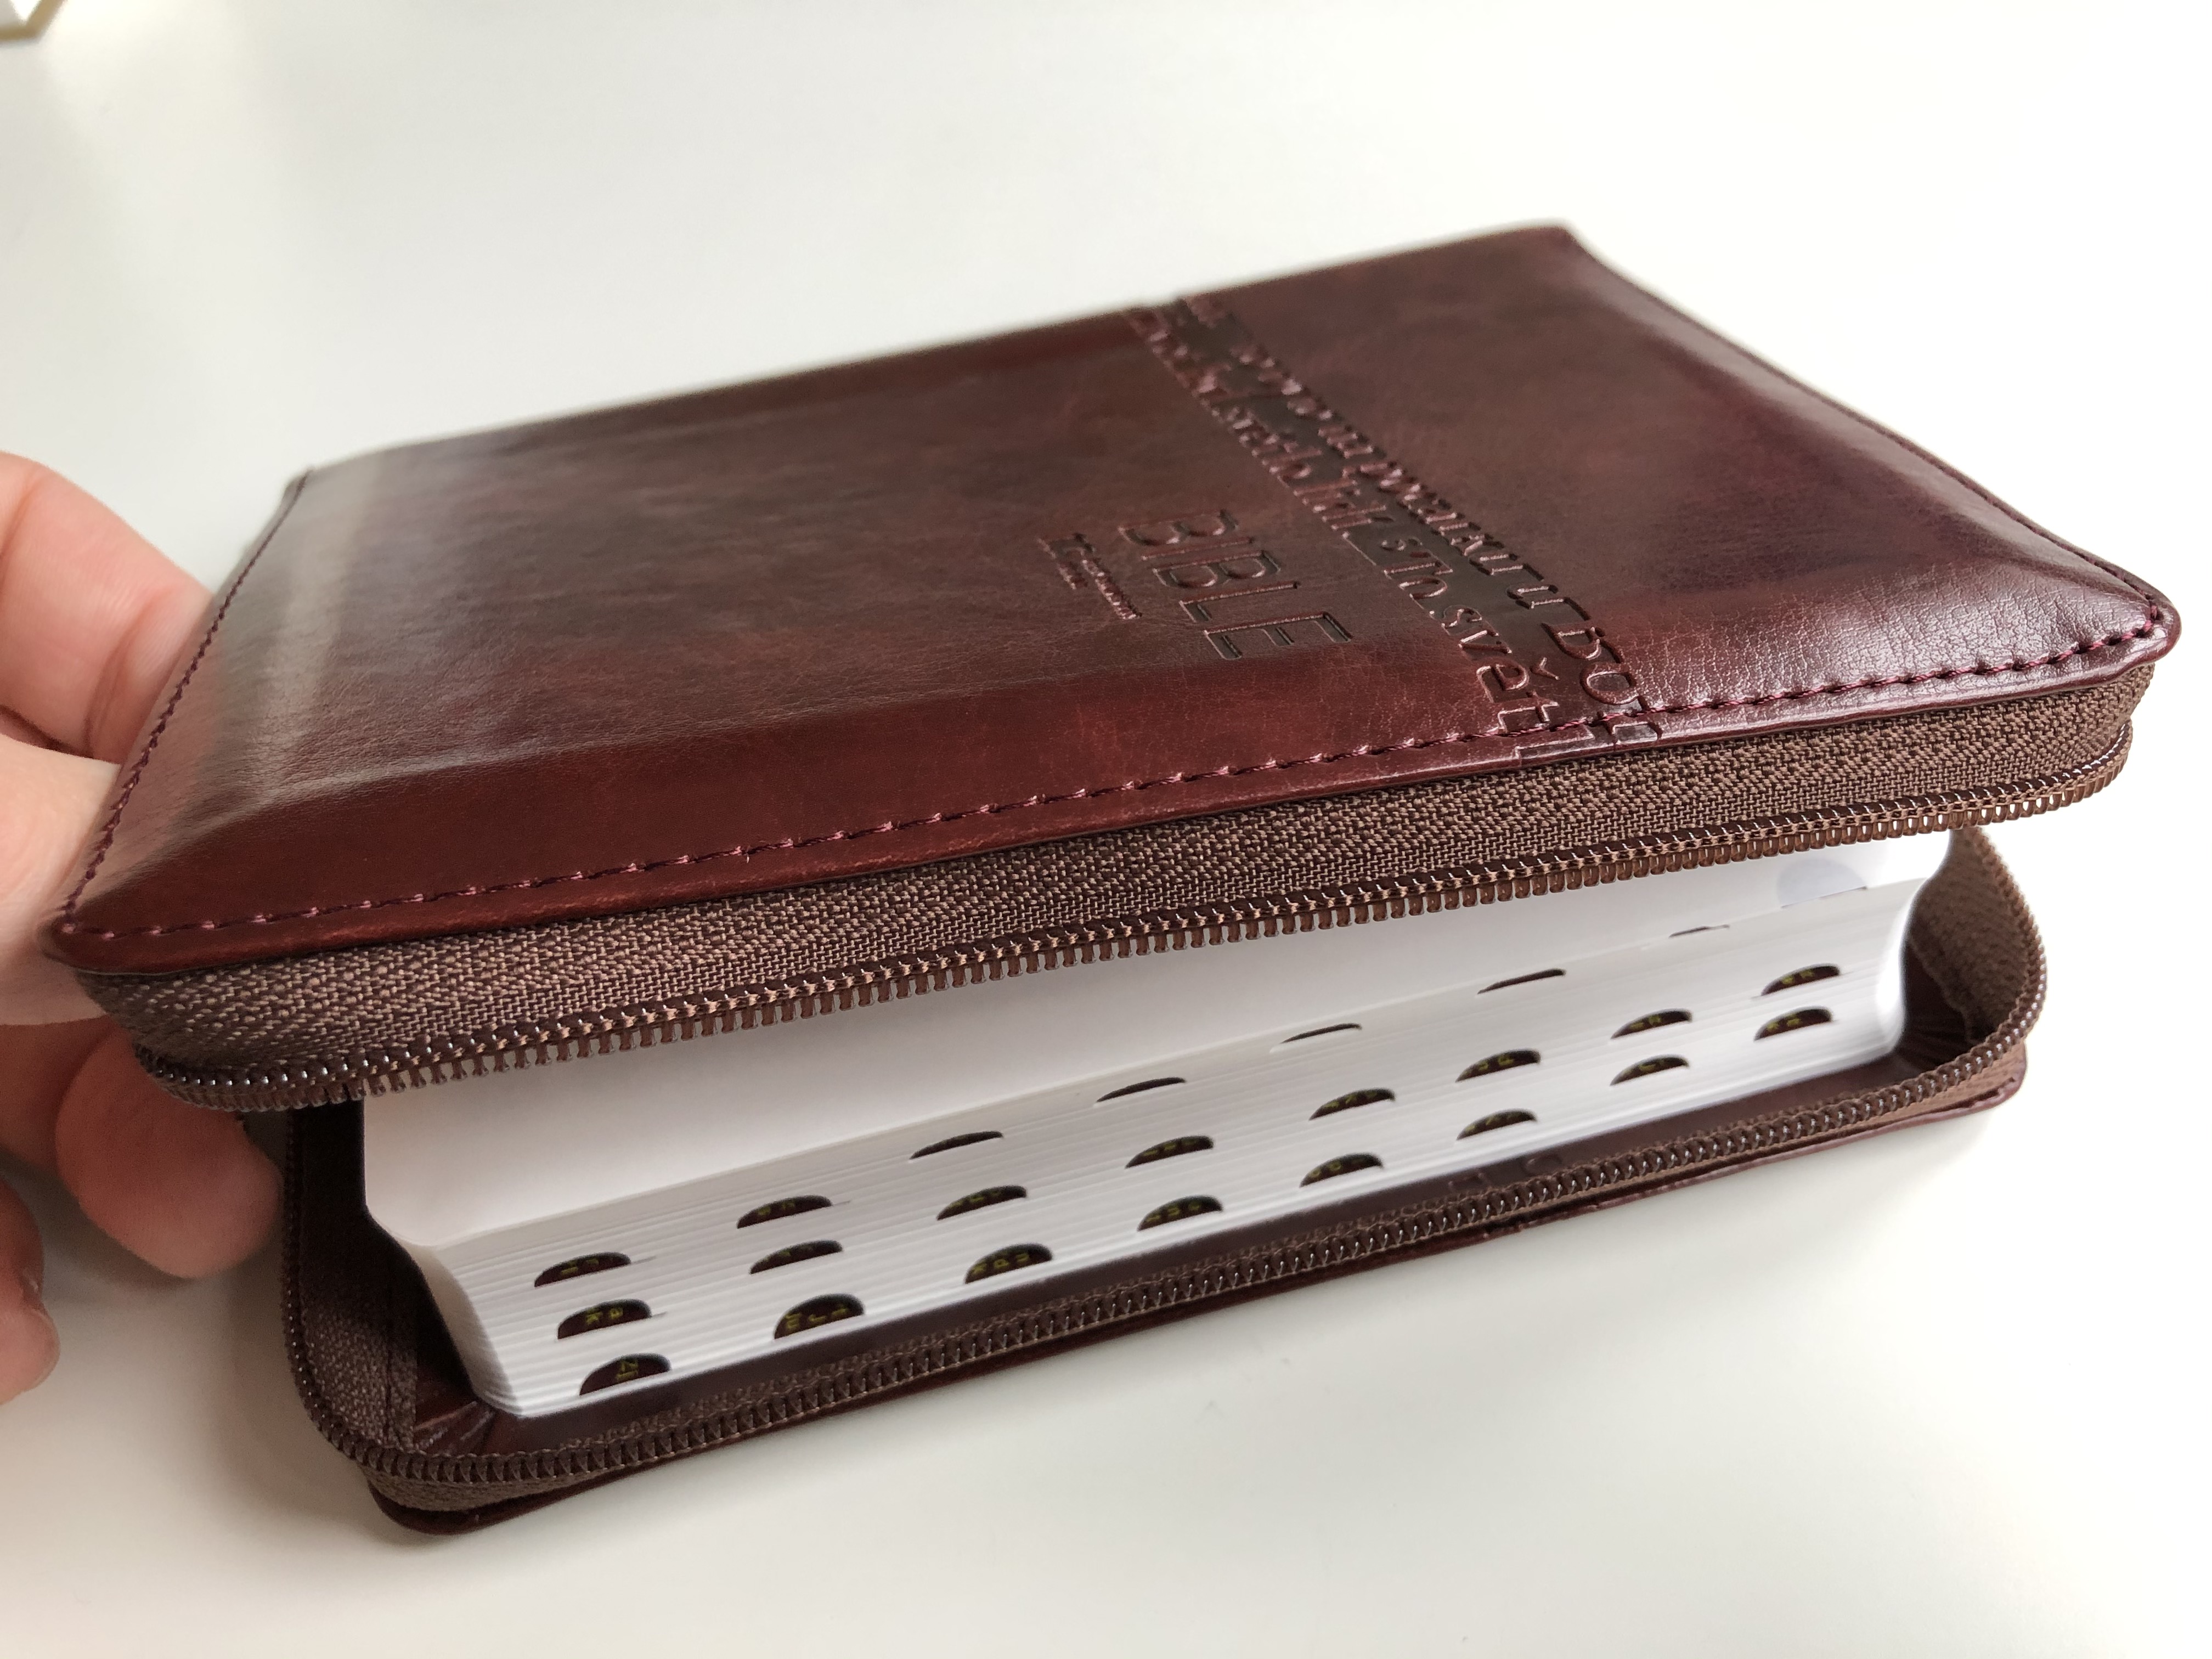 leather-bound-bible-in-czech-language-ecumenical-translation-brown-with-zipper-thumb-index-5.jpg